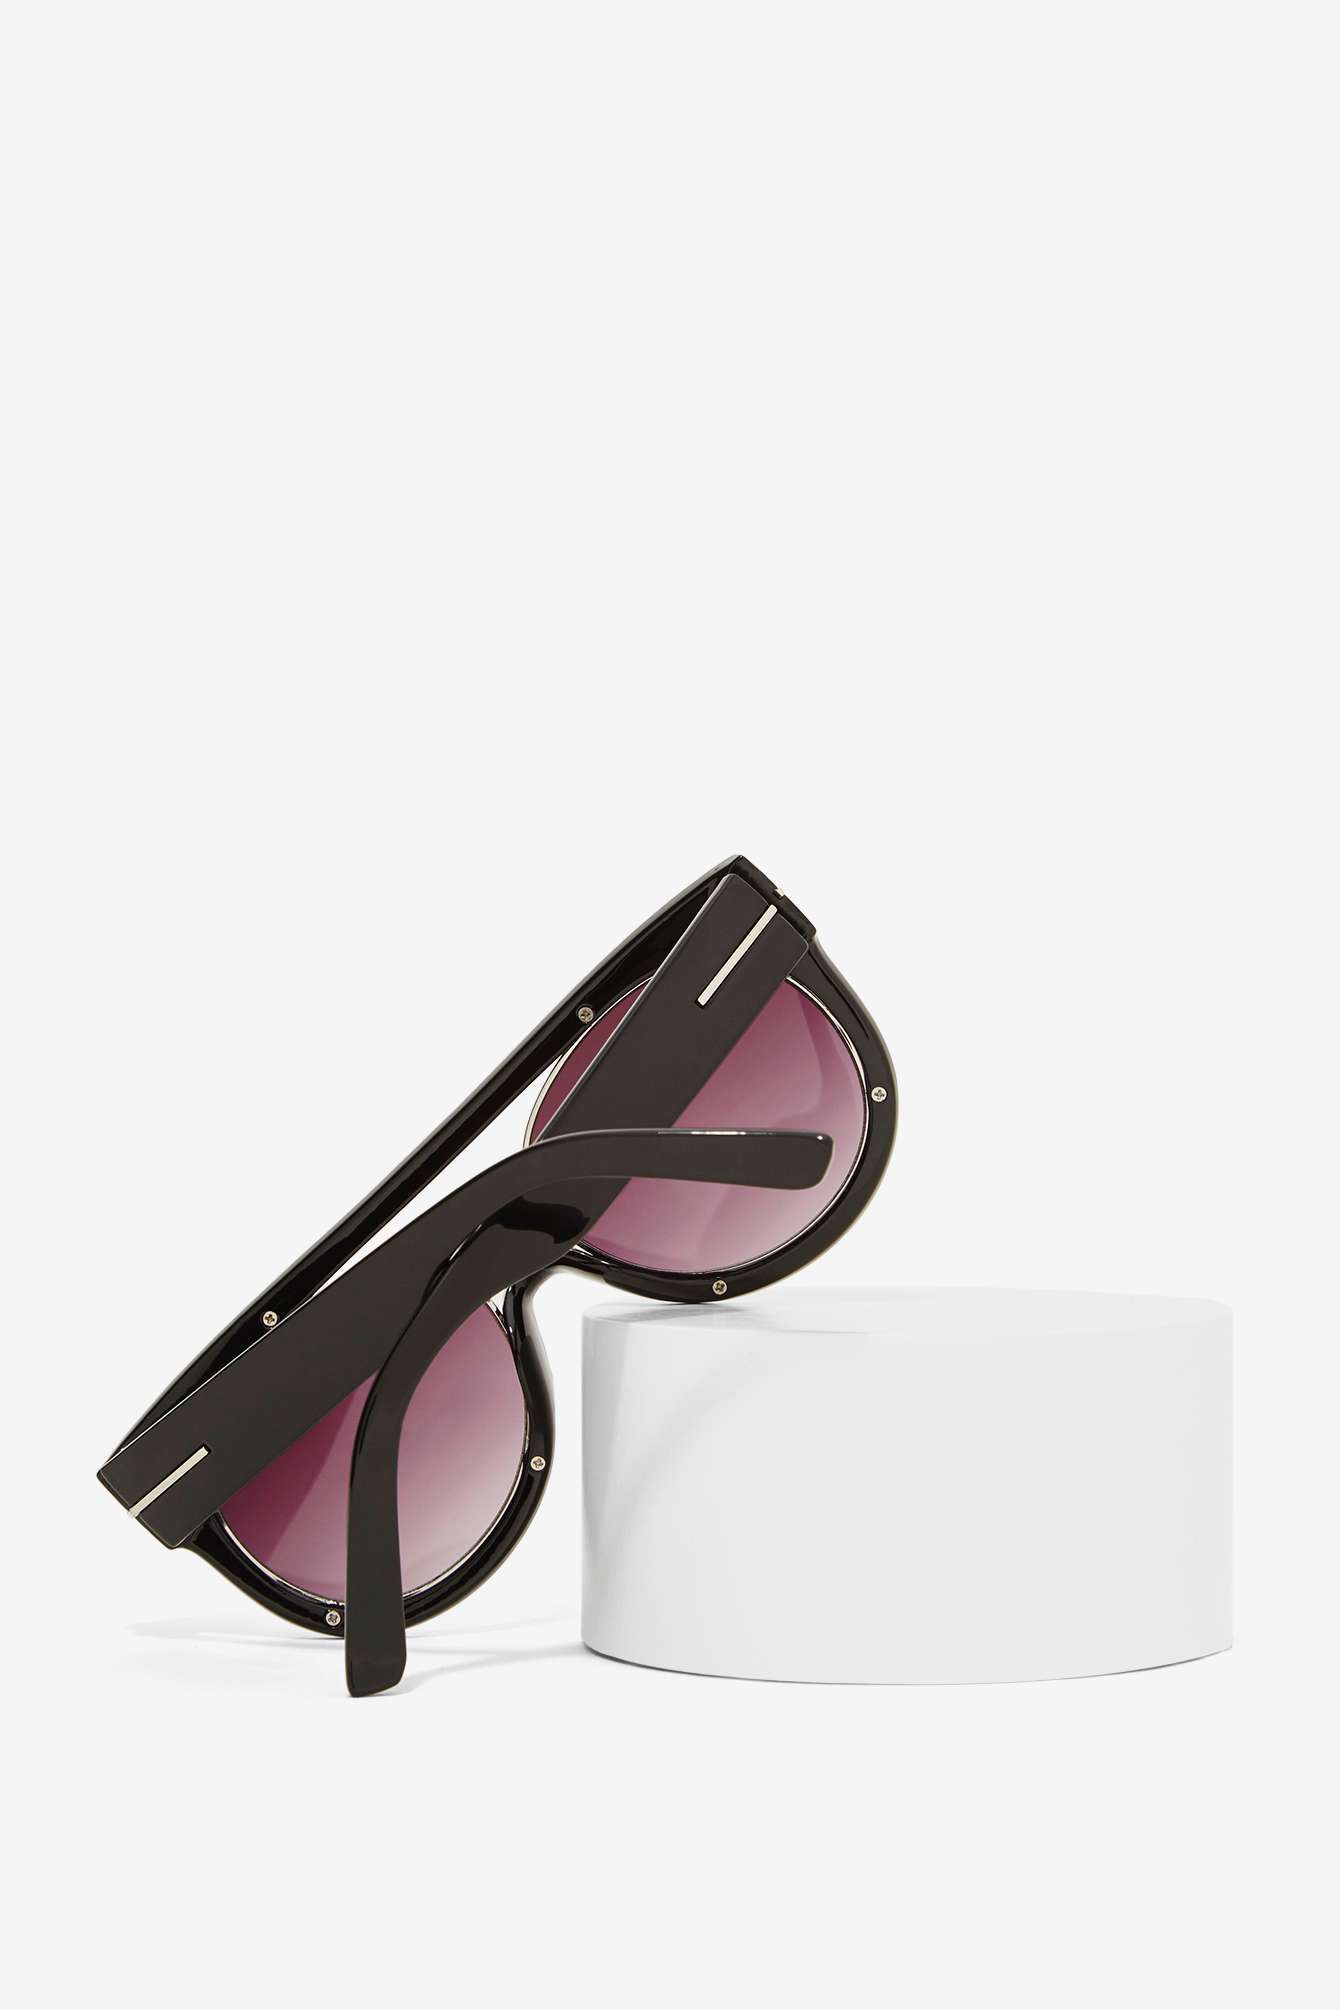 Bomb Product of the Day: Nasty Gal’s Evil Eye Block Sunglasses ...